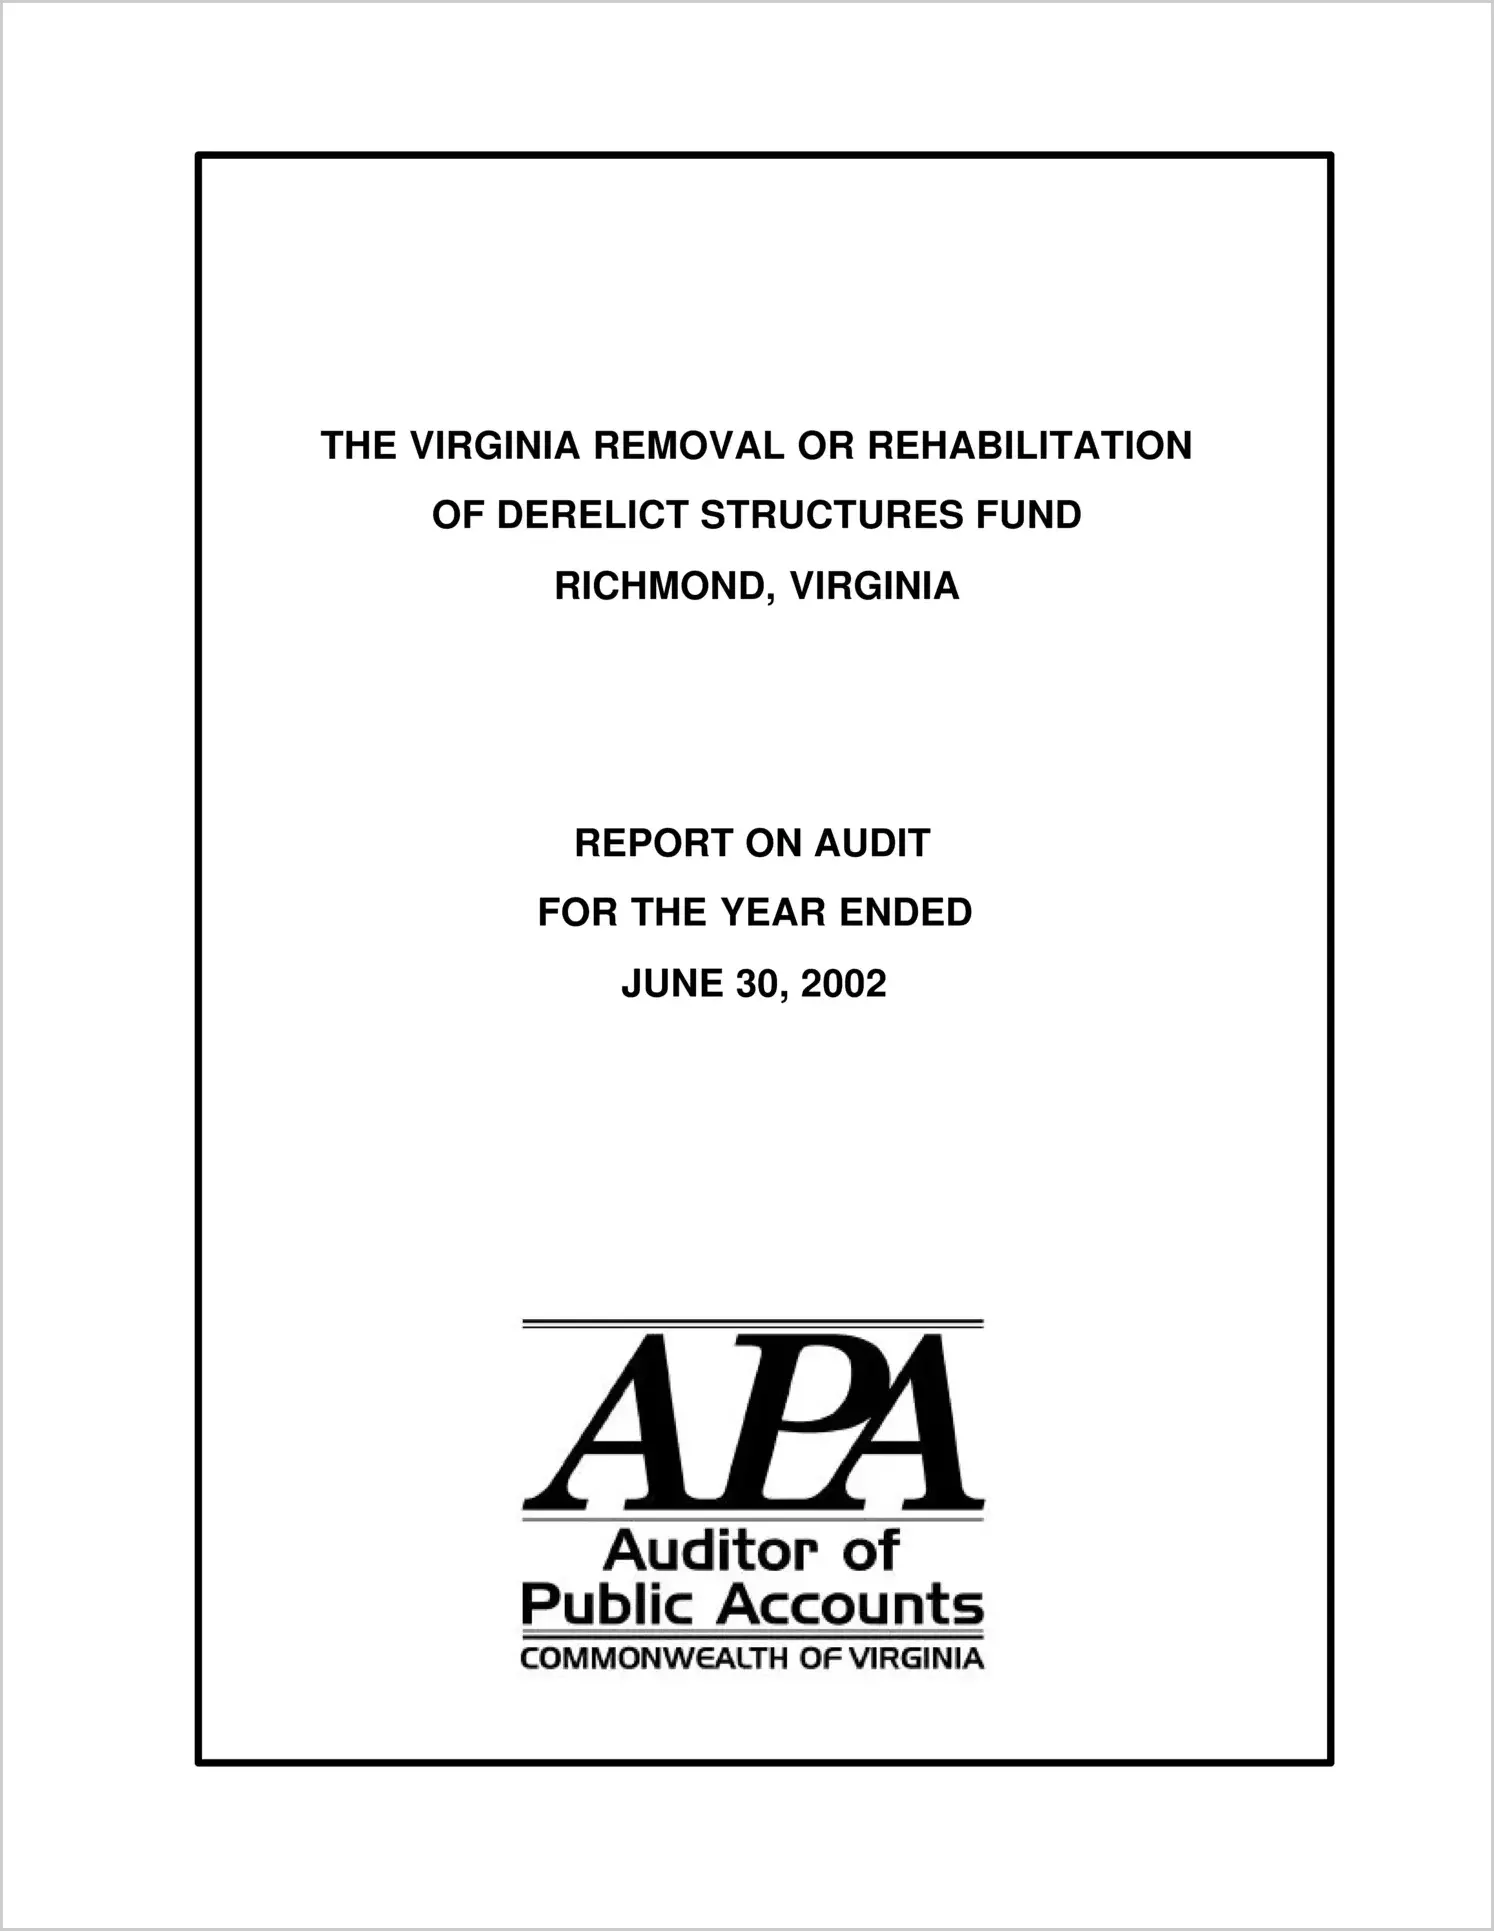 Virginia Removal or Rehabilitation of Derelict Structures Fund for the year ended June 30, 2002